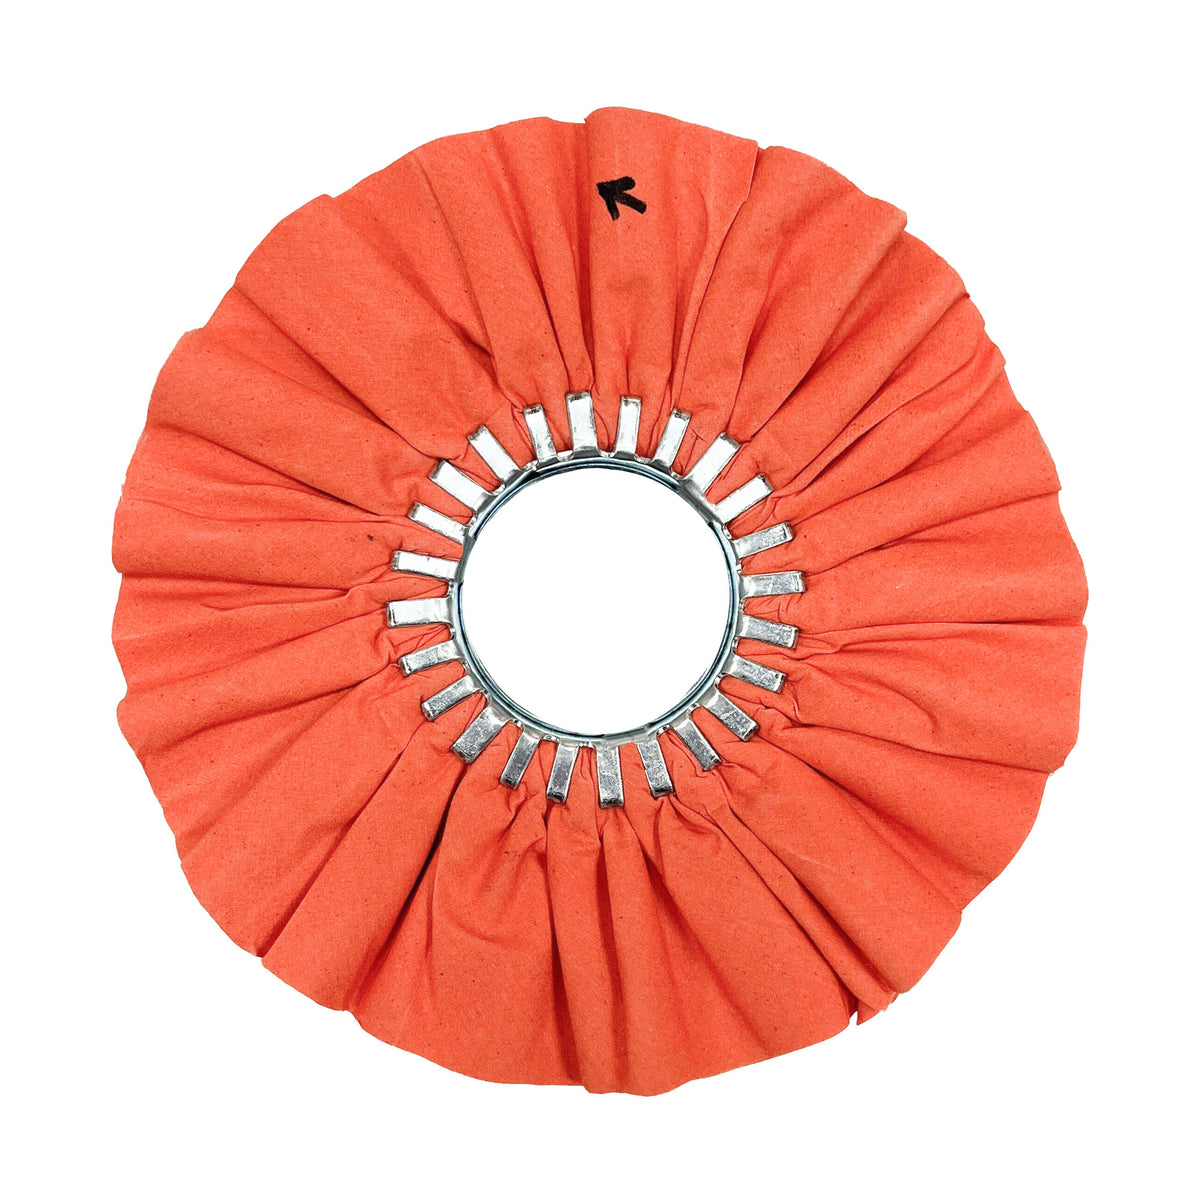 Renegade Products USA 10&quot; Orange Airway Buffing Wheel - High-Quality Buffing Tool for Efficient Polishing and Finishing Tasks